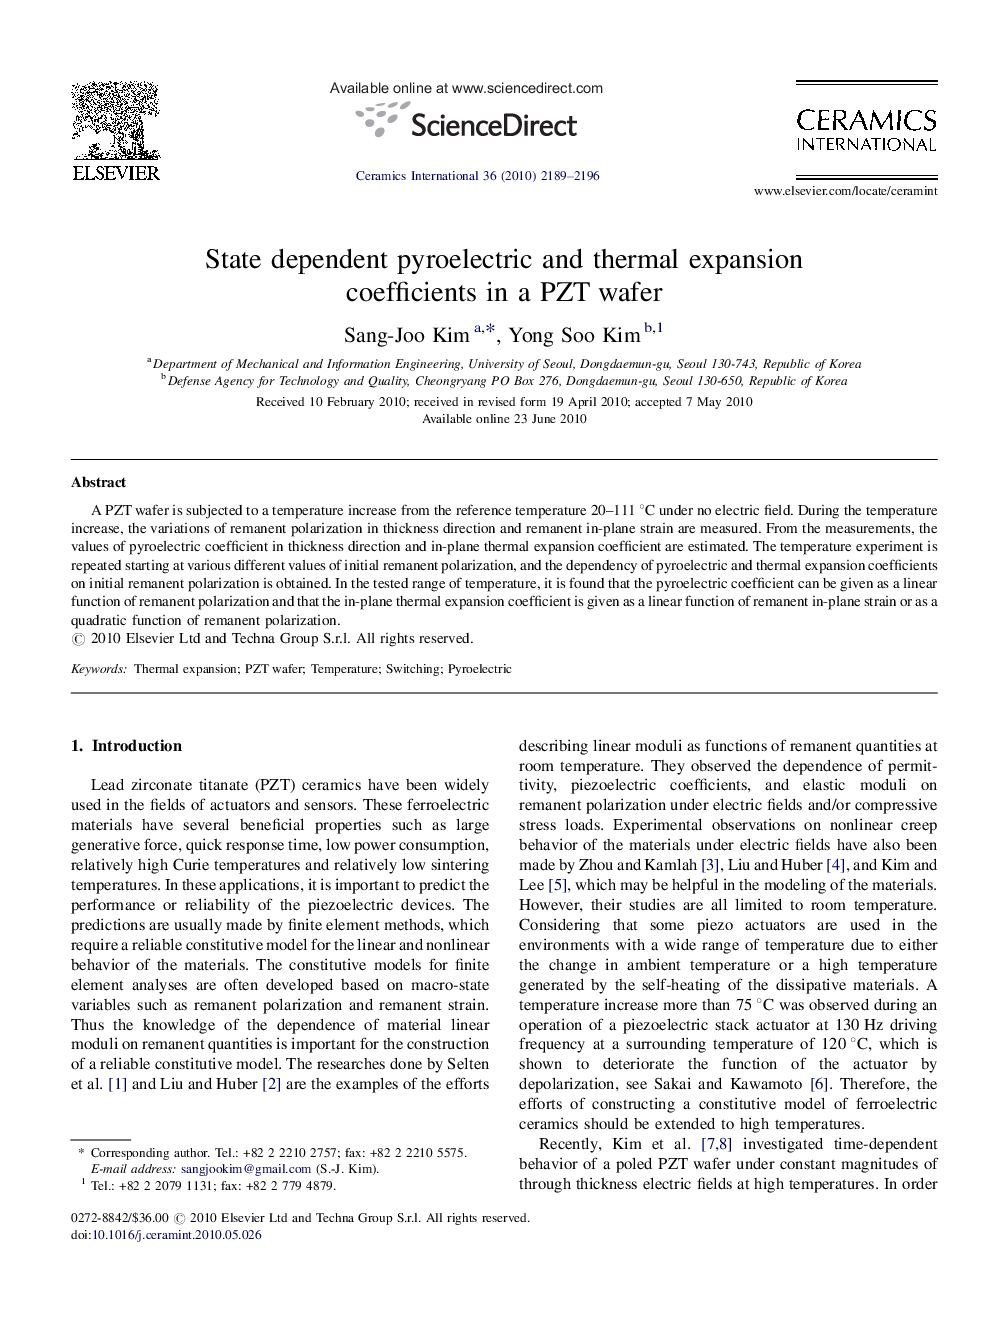 State dependent pyroelectric and thermal expansion coefficients in a PZT wafer